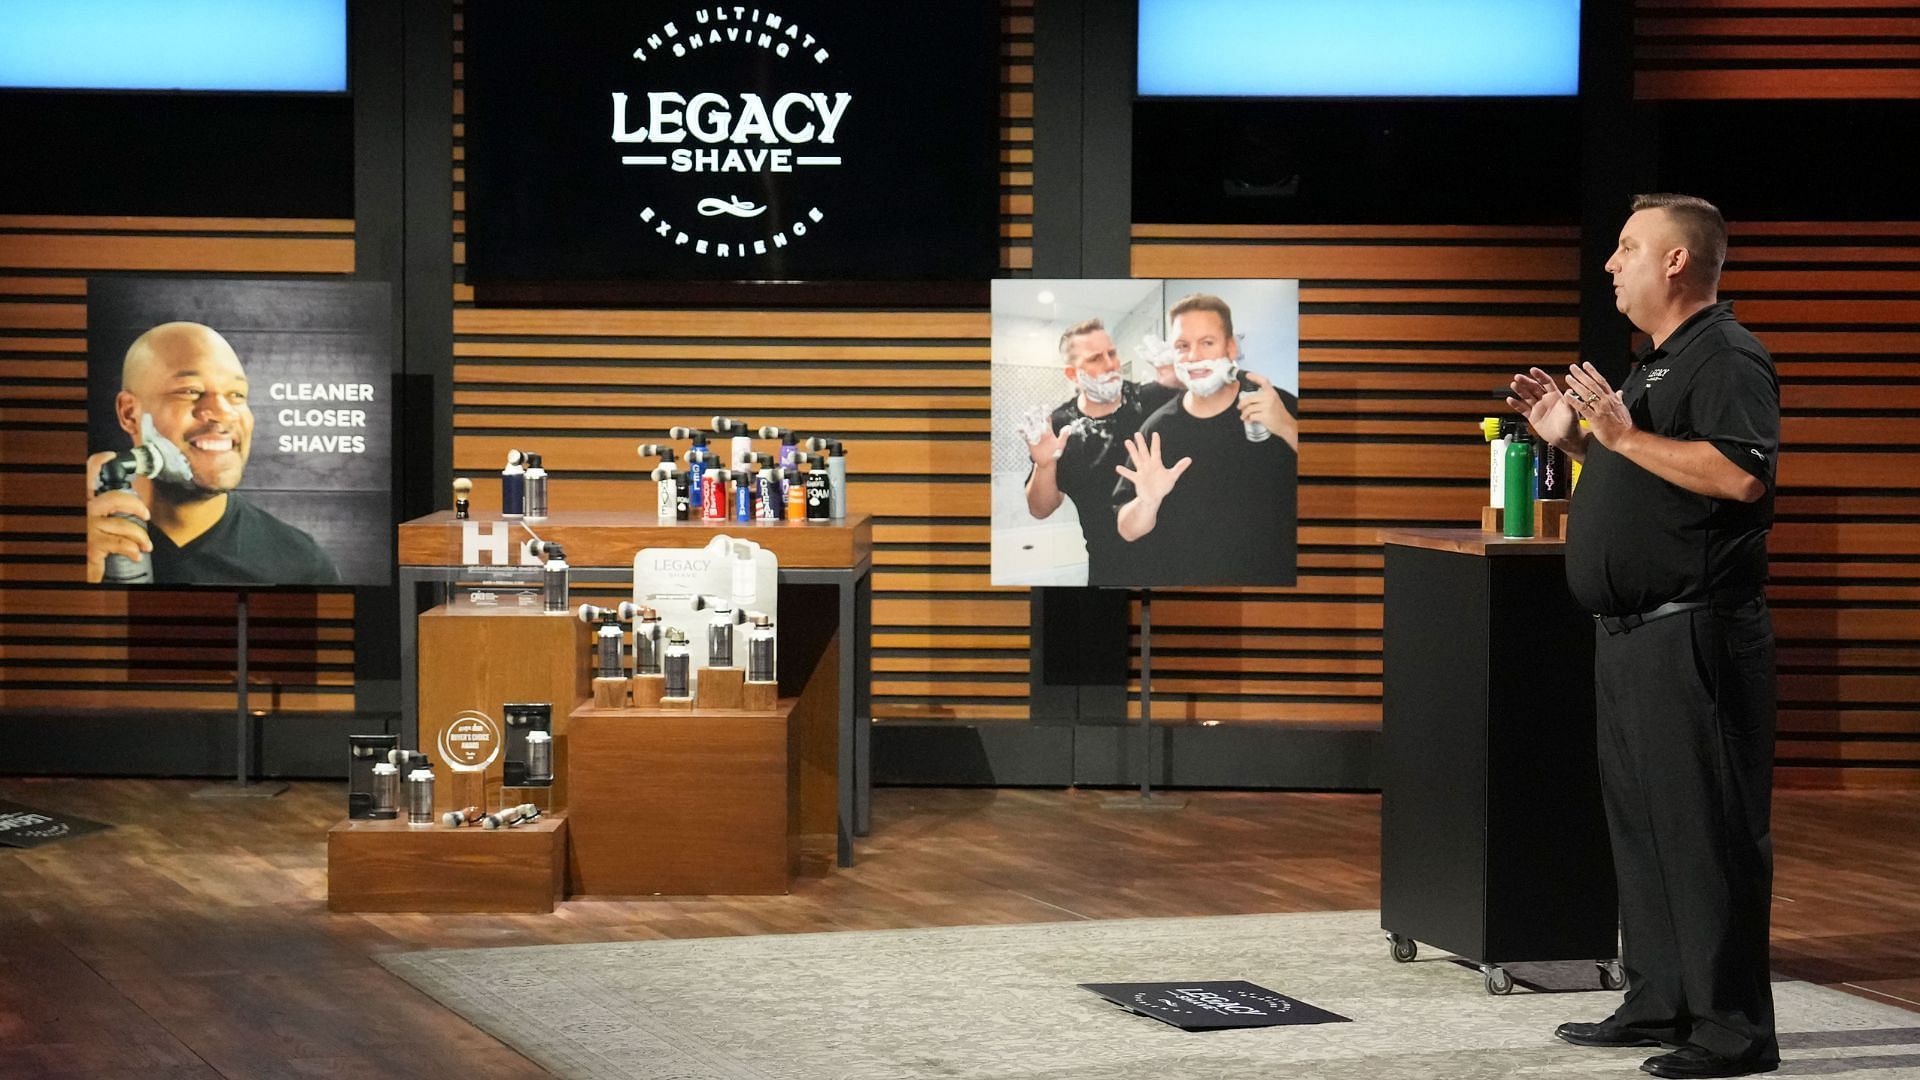 Legacy Shave on Shark Tank: Founders Dave and Mike came up with the